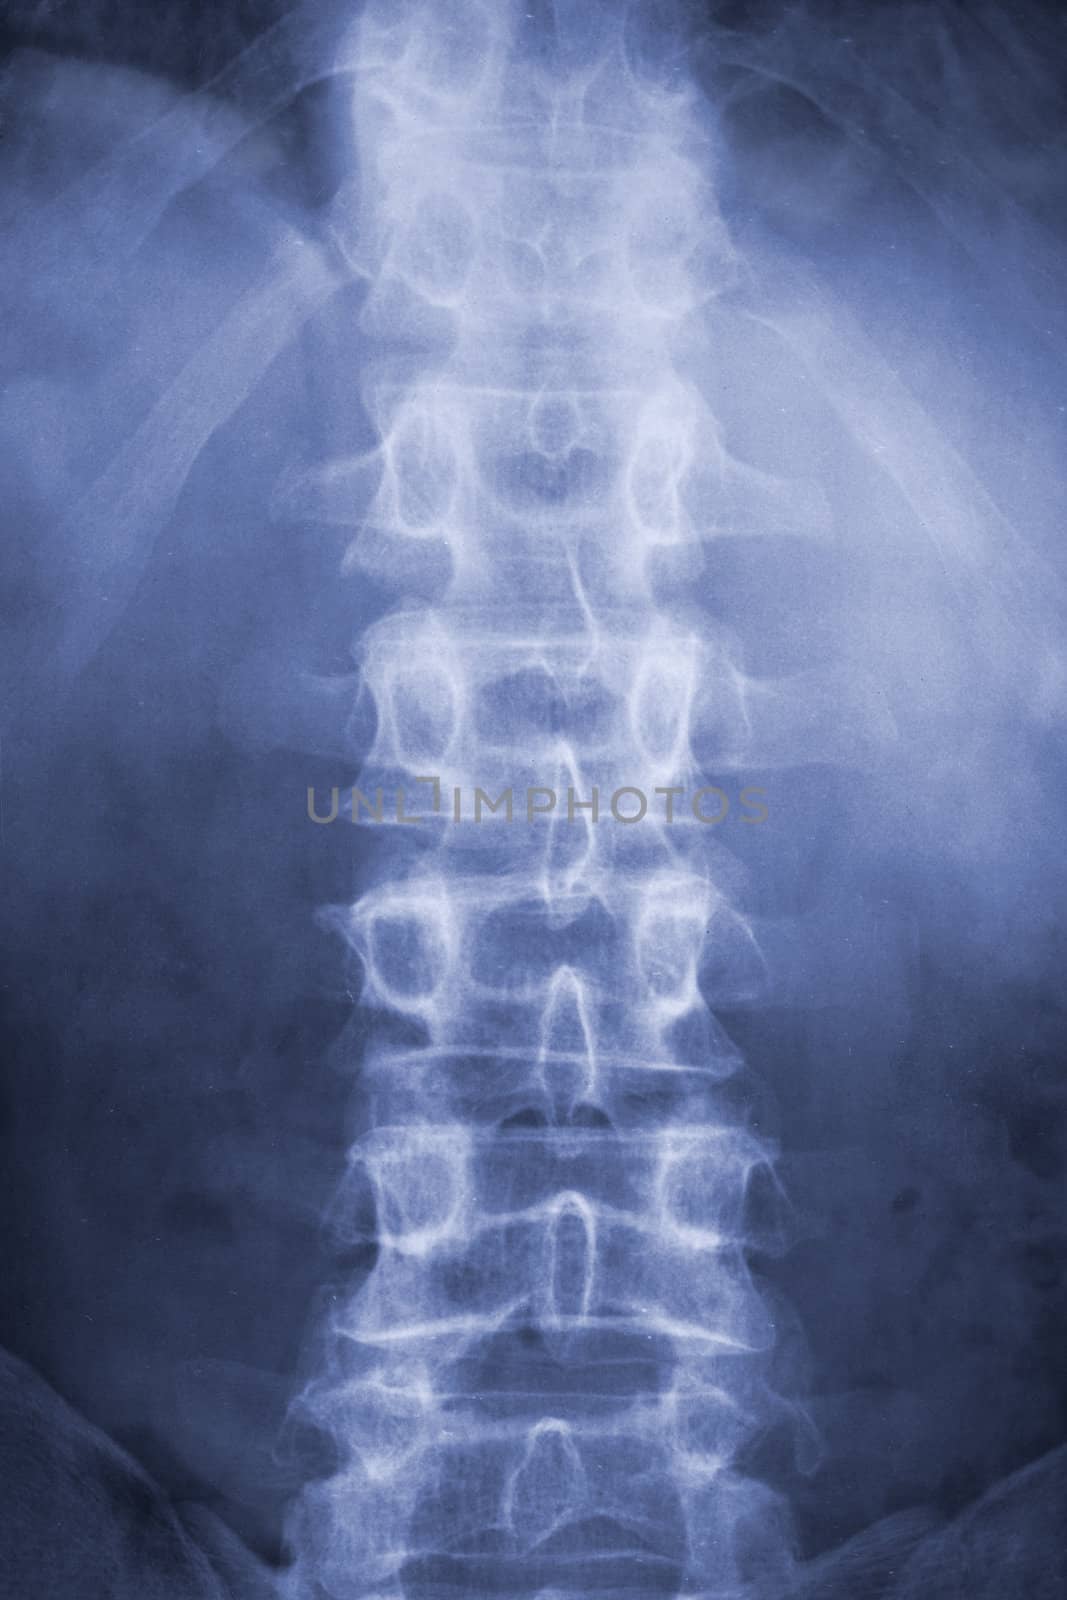 spine and pelvis of a human body on x-ray